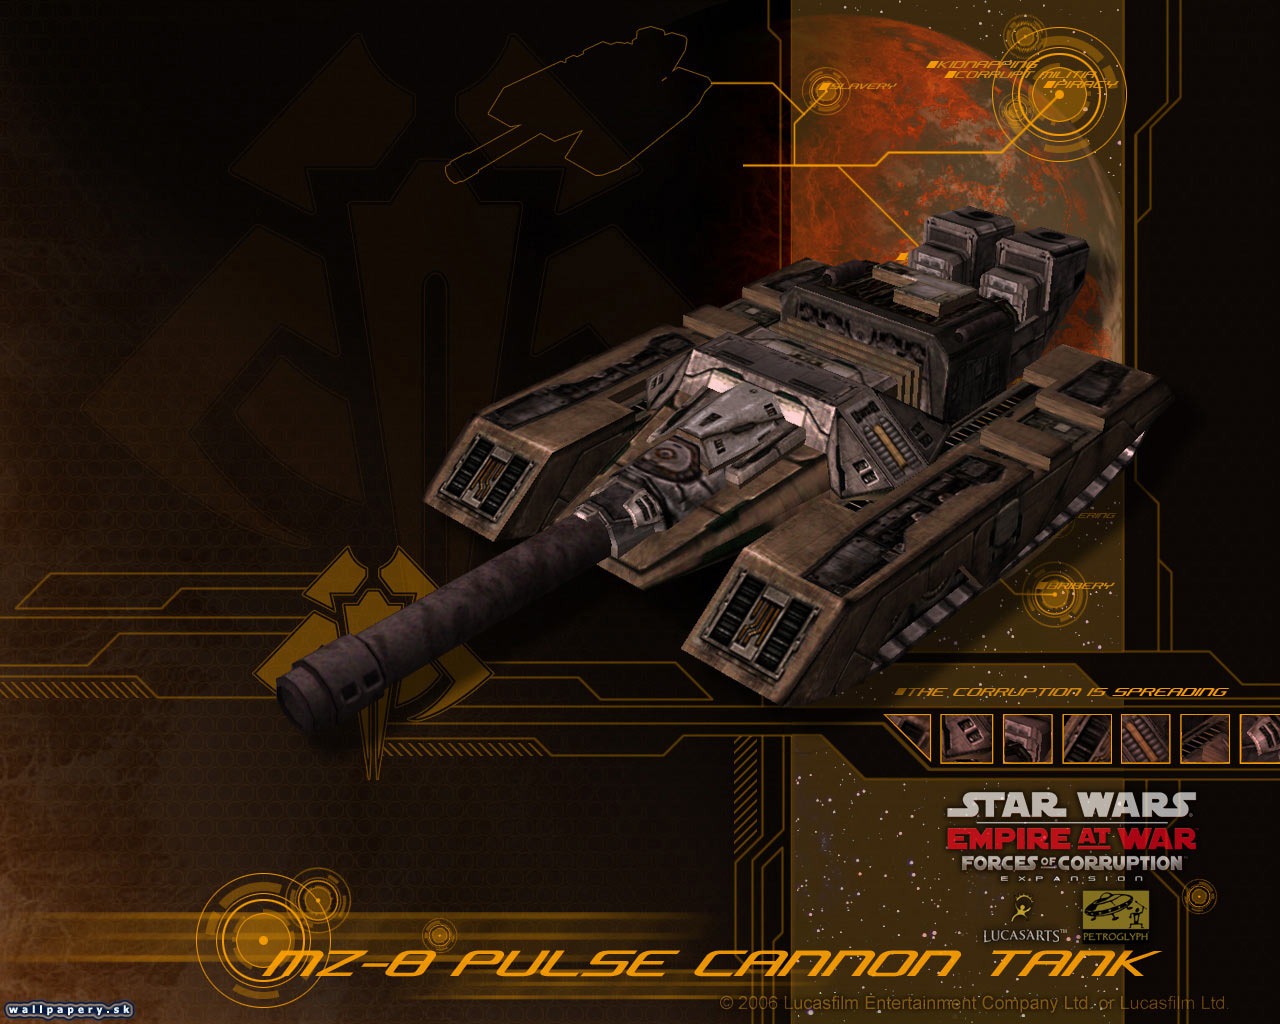 Star Wars: Empire At War - Forces of Corruption - wallpaper 8